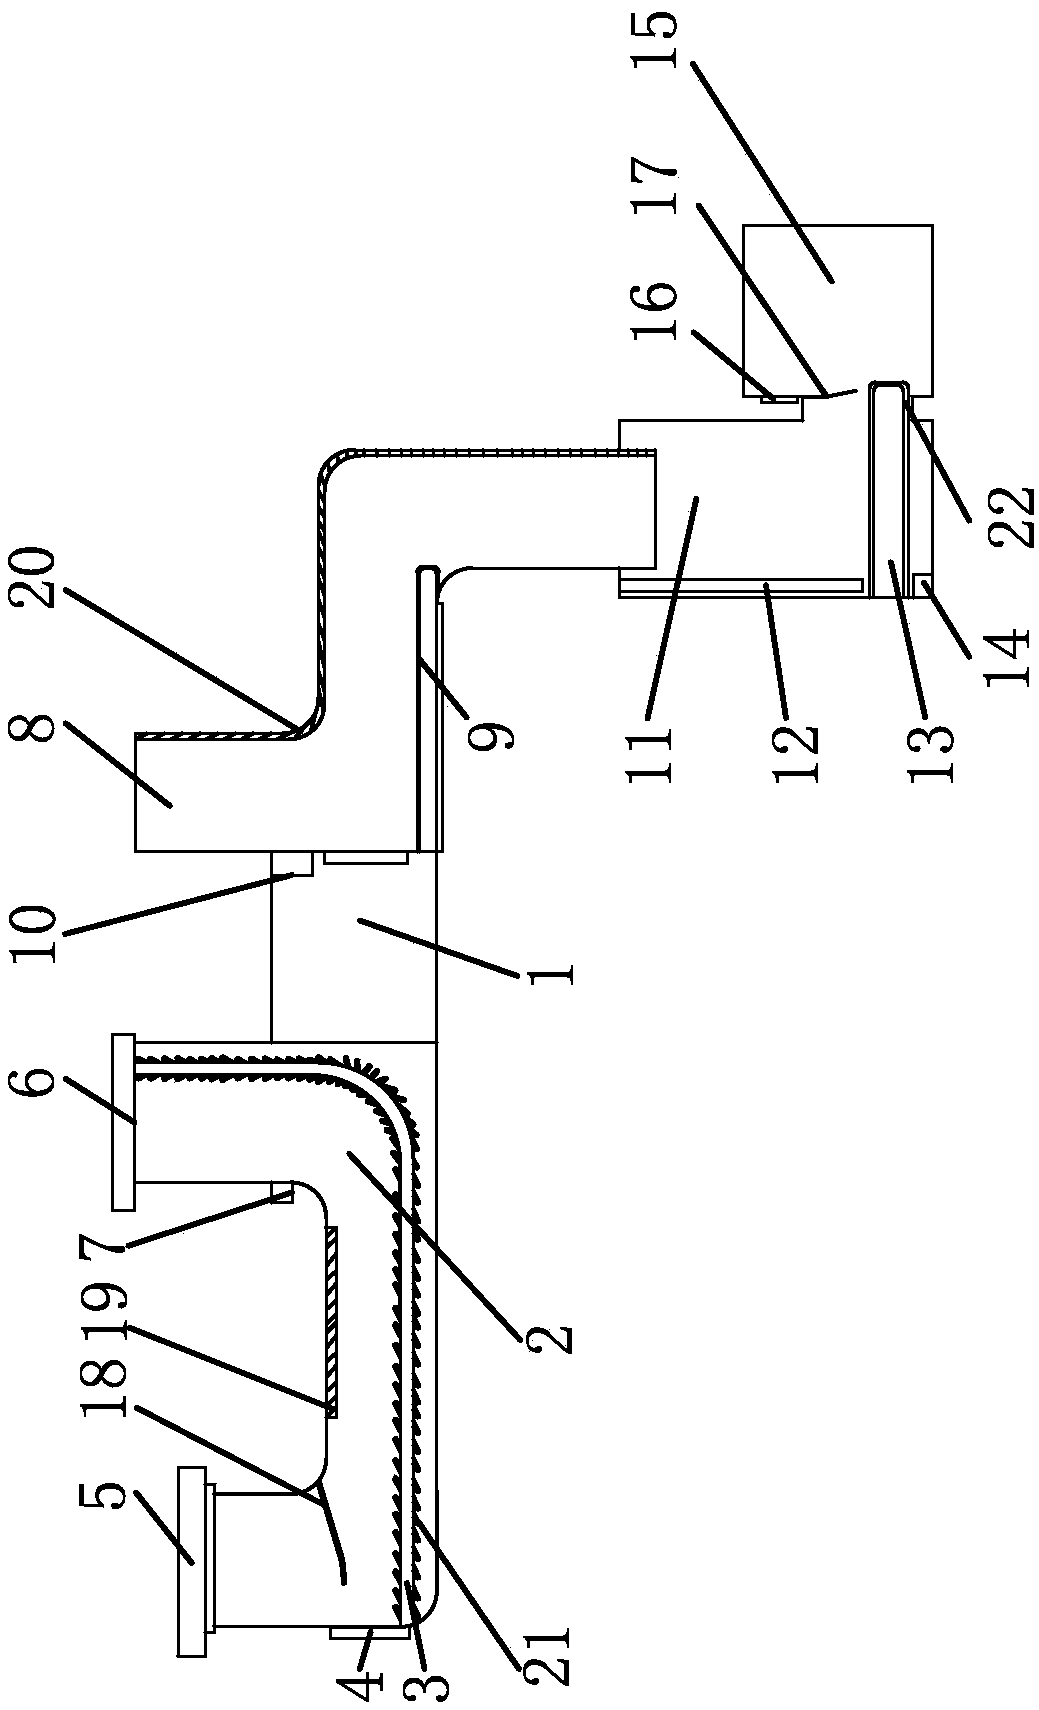 Feeding and discharging auxiliary device of paper cup machine